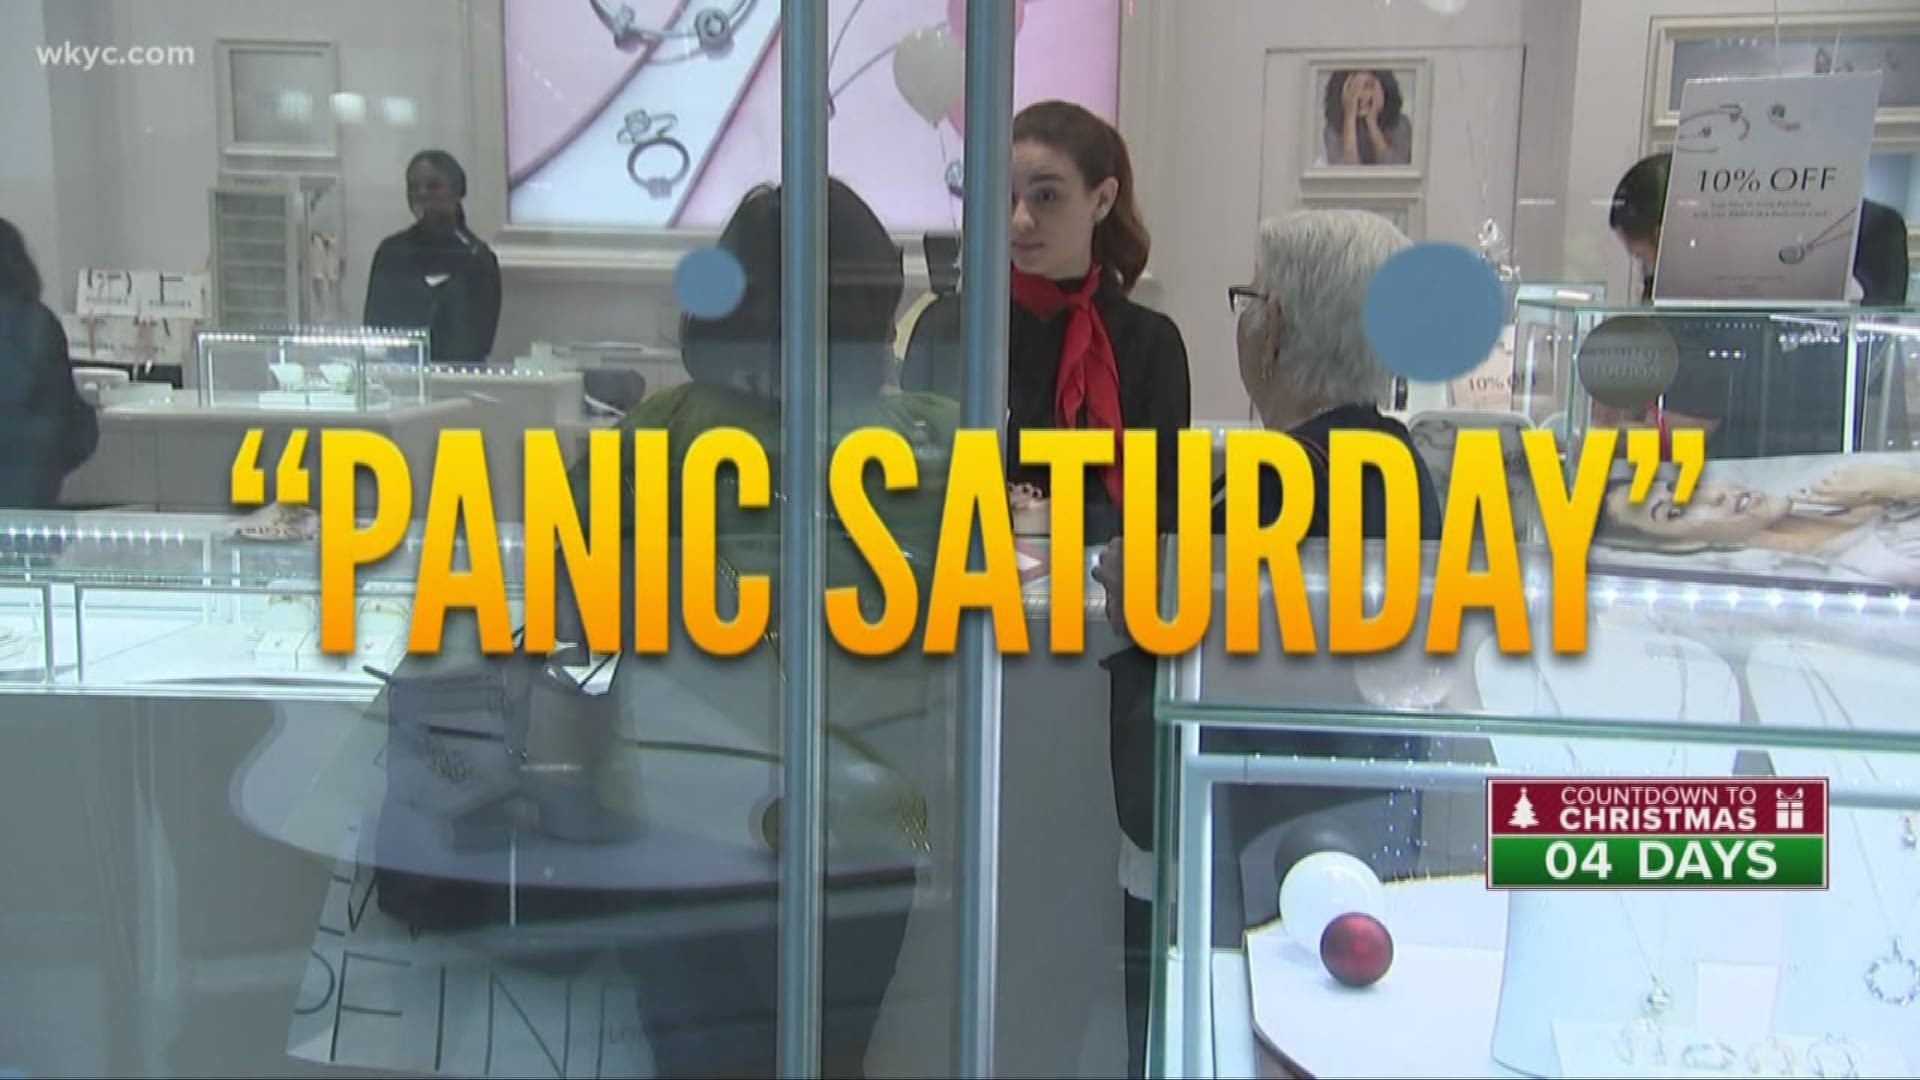 High anxiety! There's a new name for last minute shopping: Panic Saturday